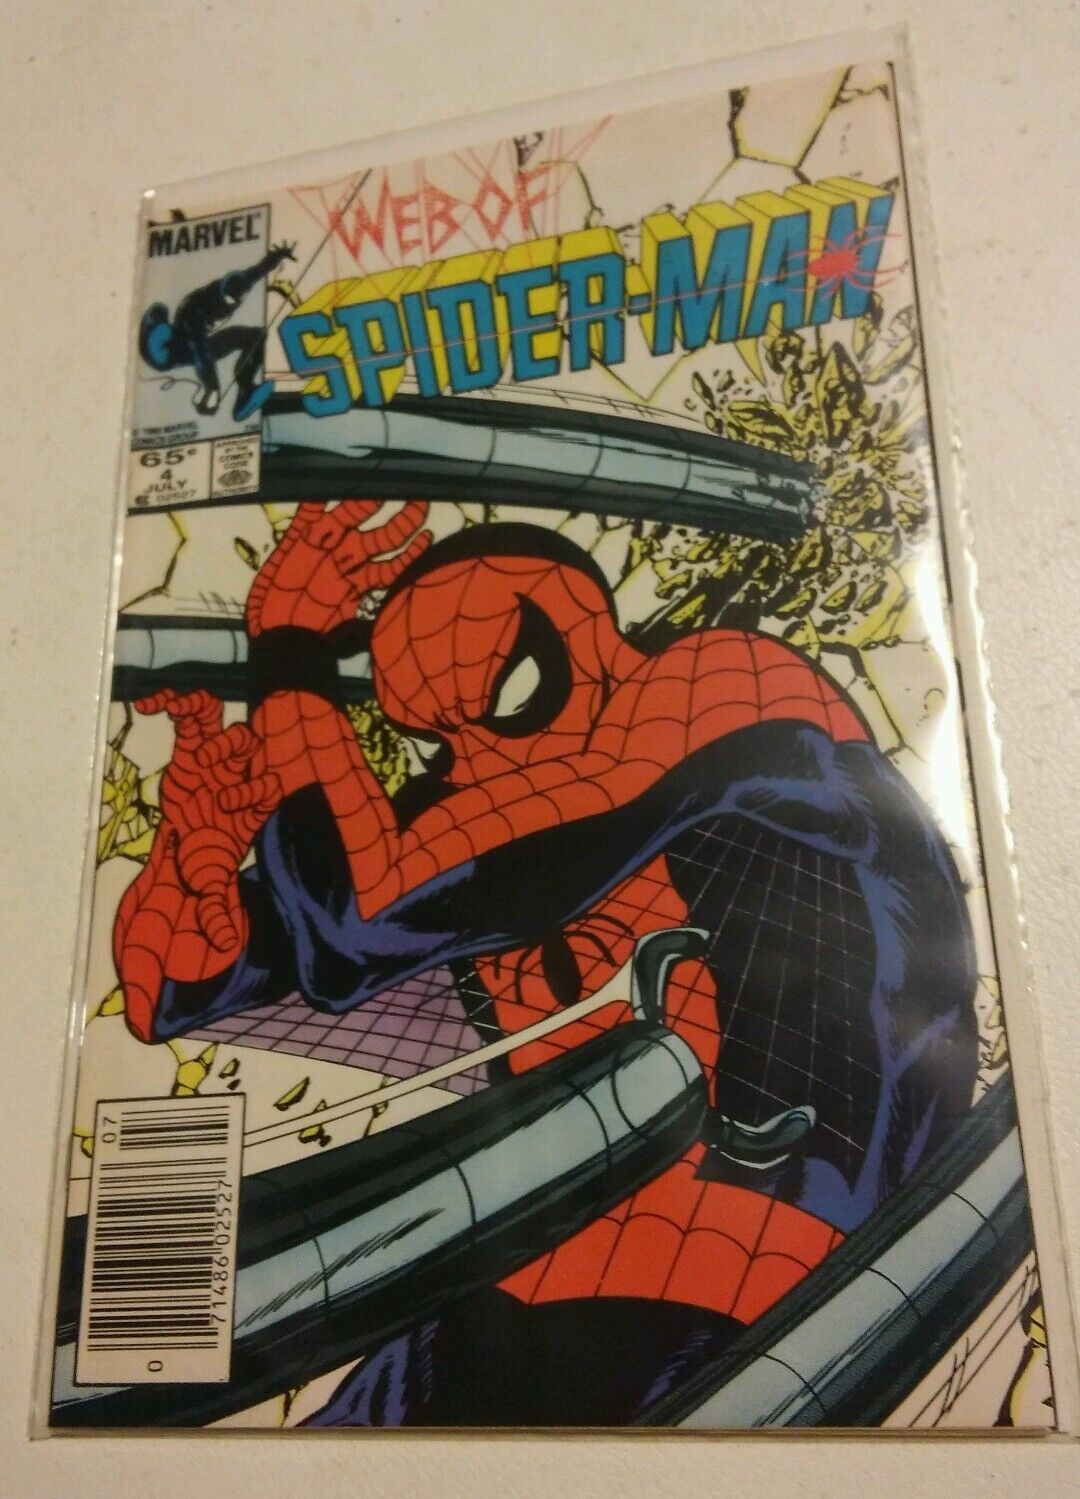 Primary image for 000 Vintage Marvel Comic Book Web of Spider-Man Issue # 4 July